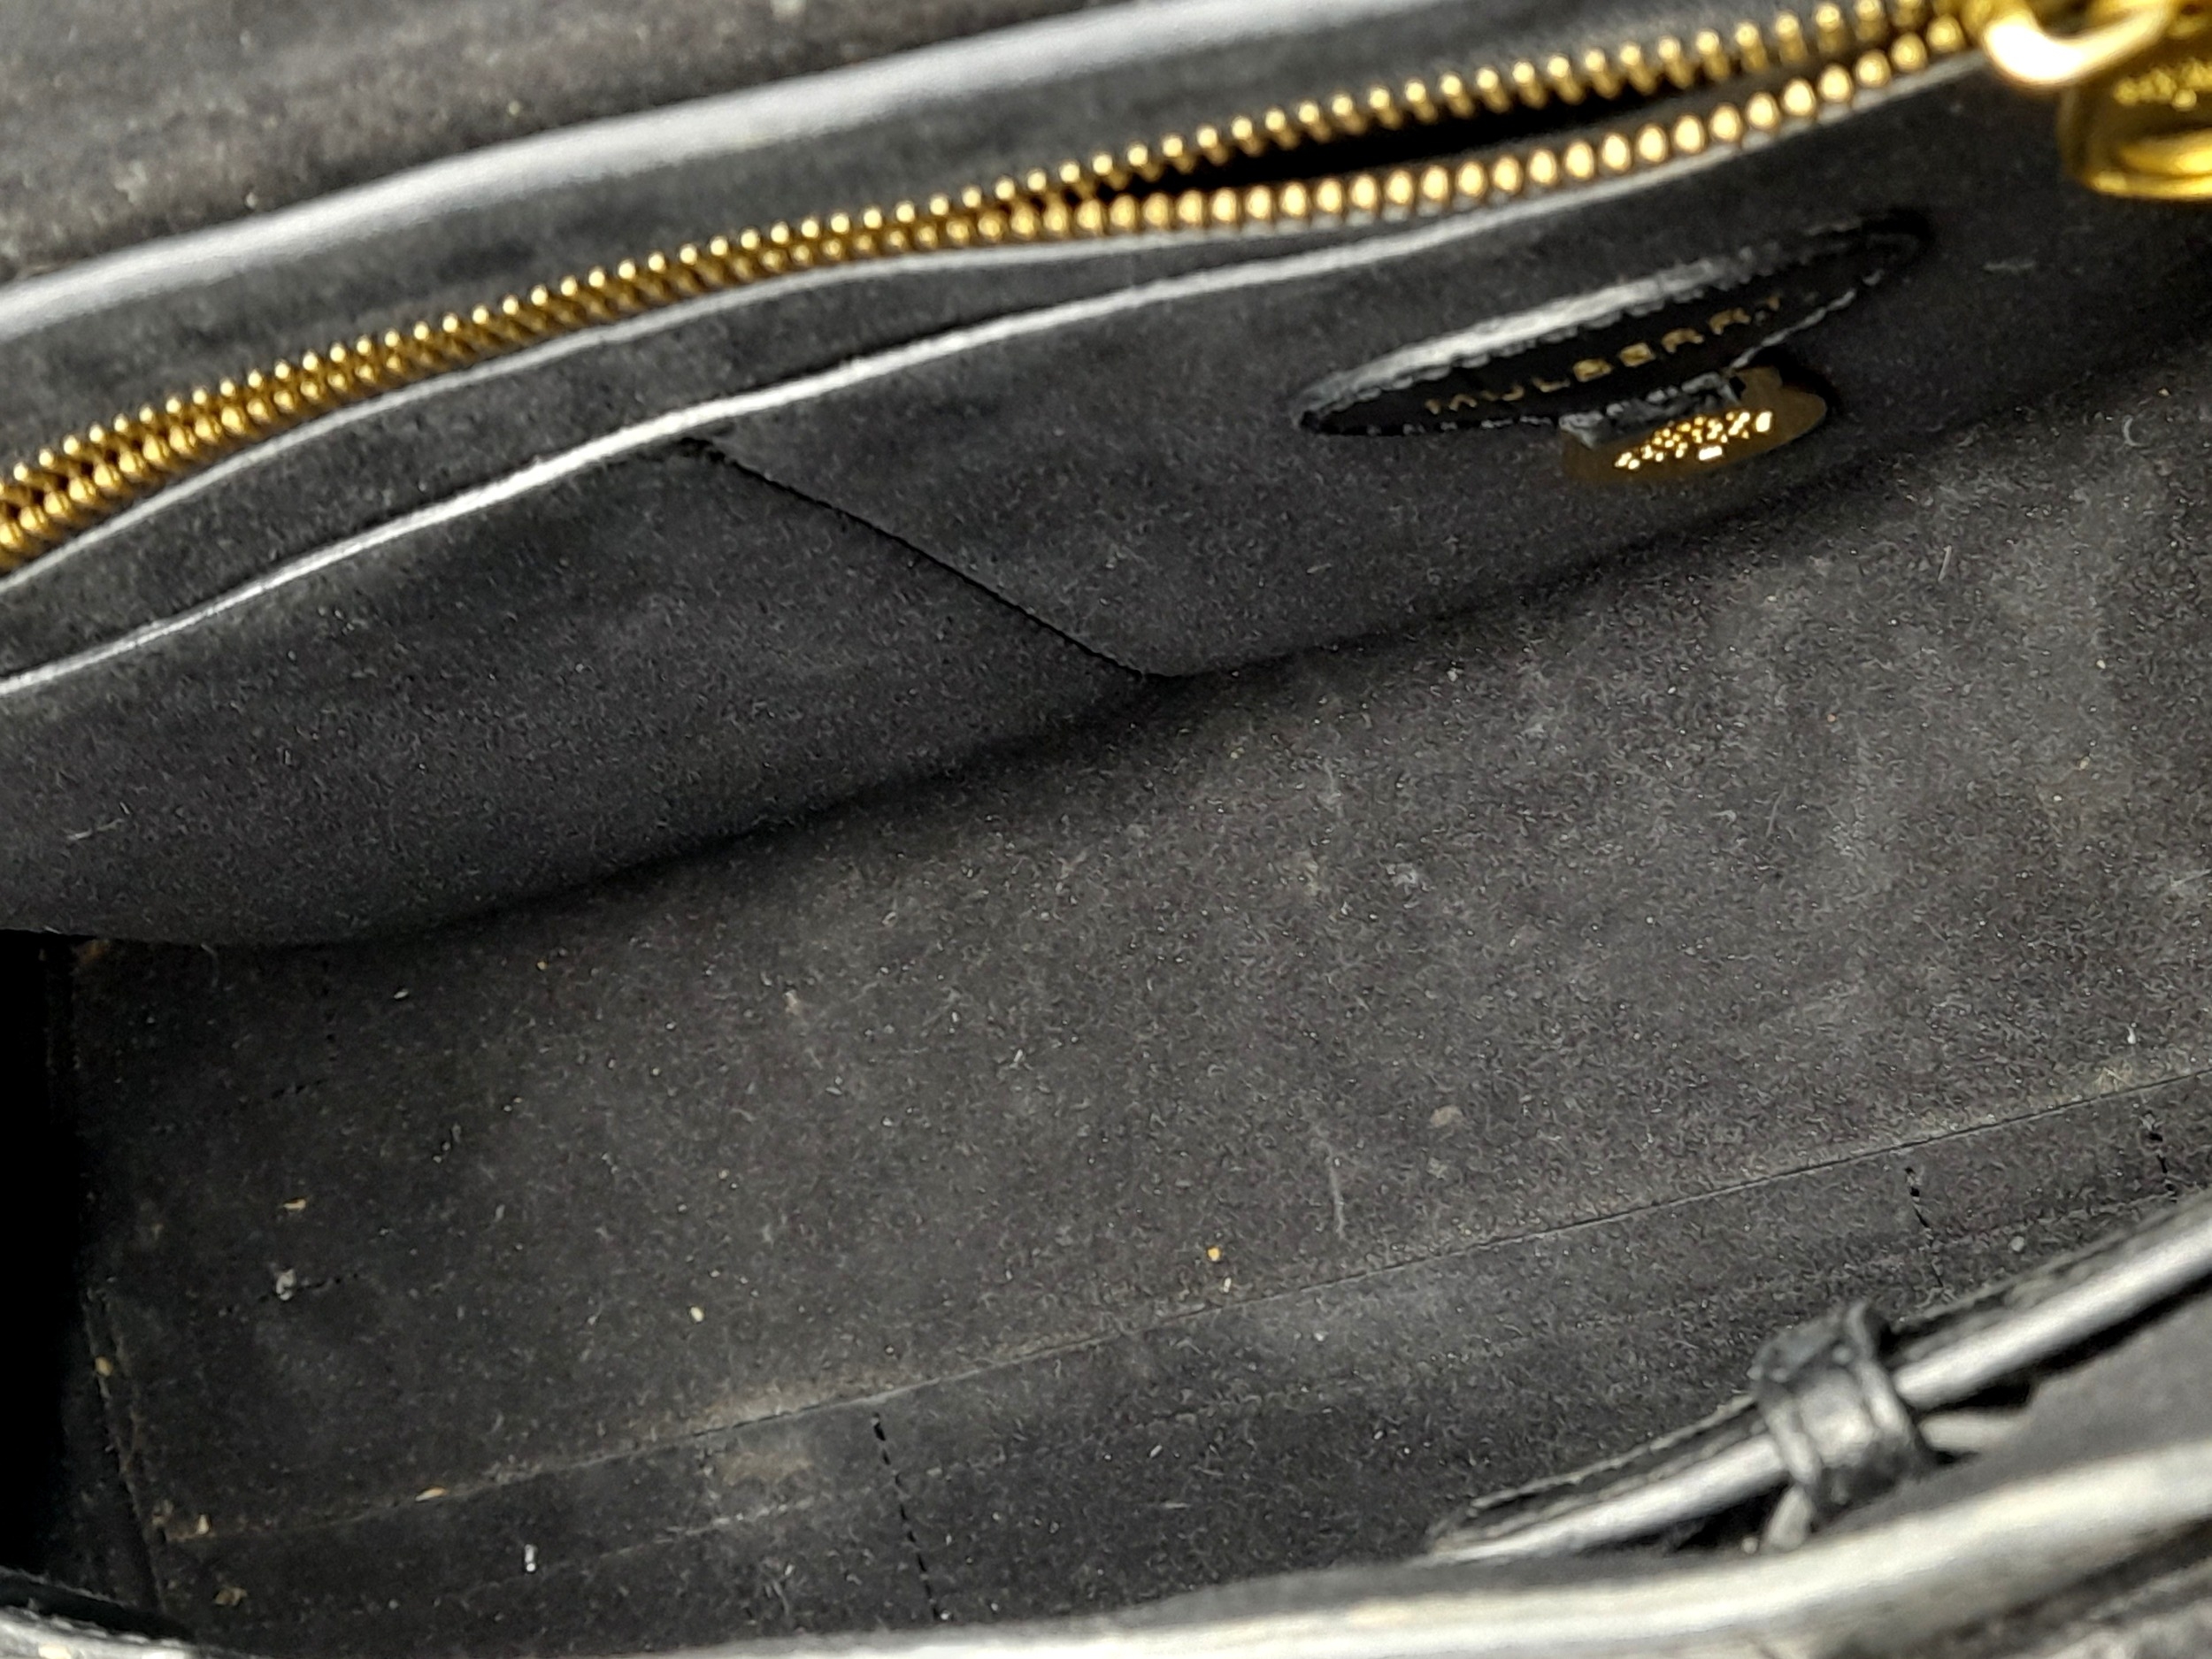 A Mulberry Bayswater Handbag. Black Croc Embossed Leather exterior, gold-tone hardware, a clochette, - Image 3 of 7